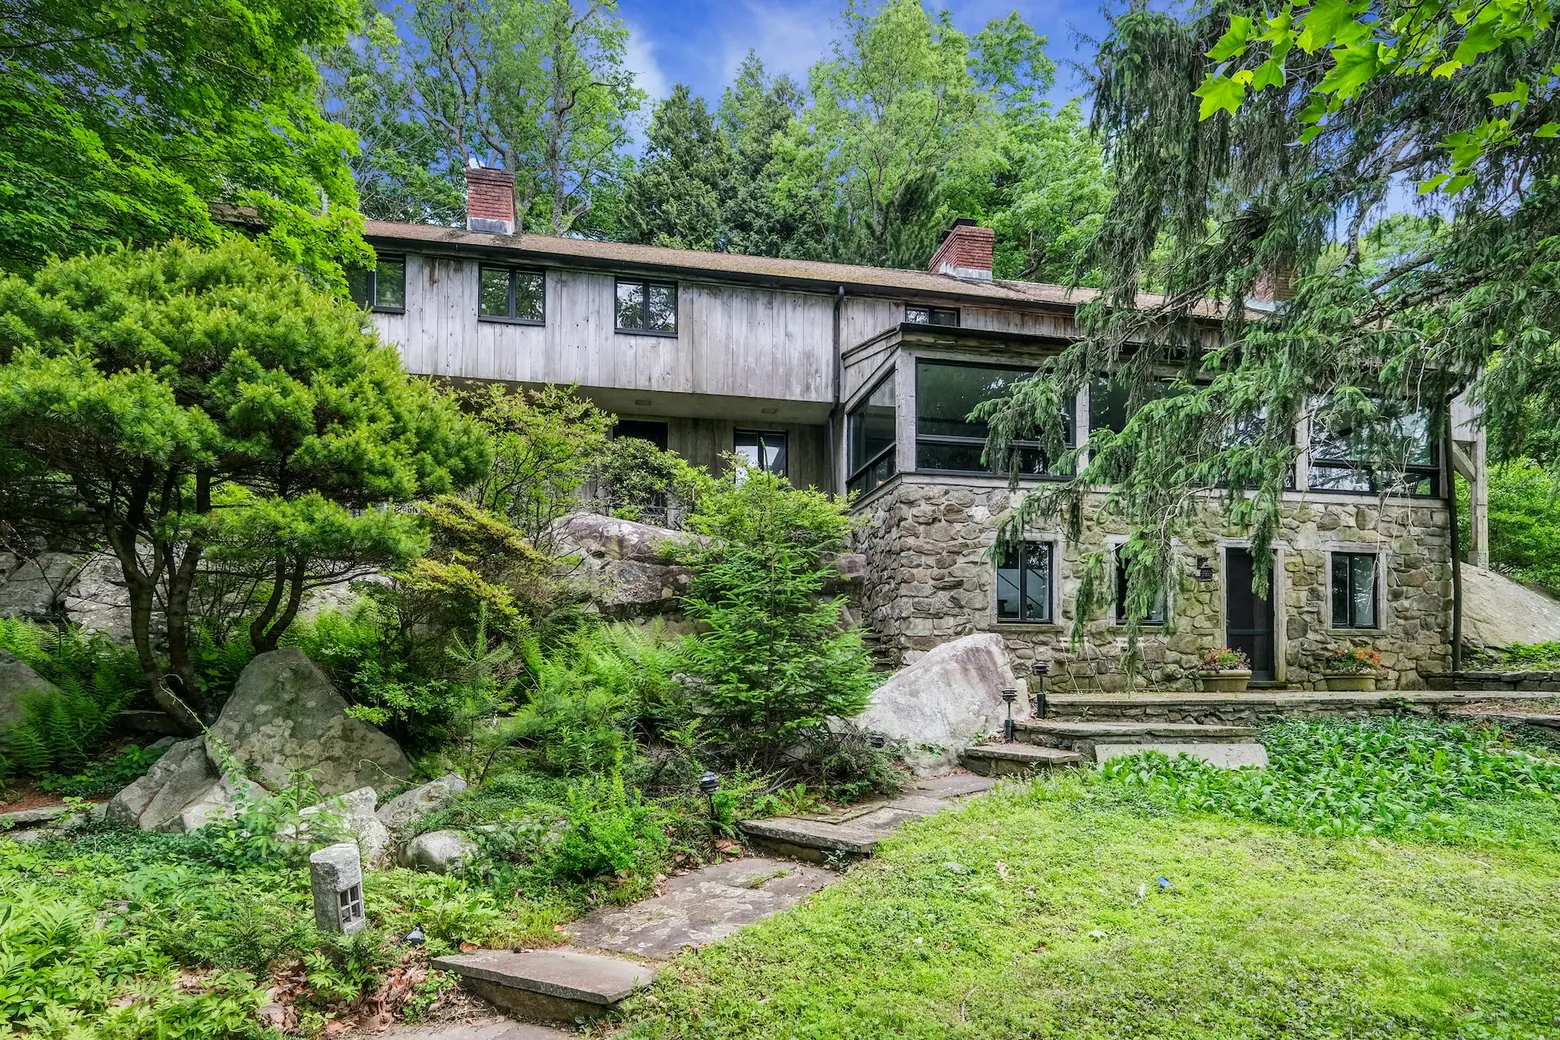 In Westchester, an 1860s barn was converted to a mid-century estate for $1.25M